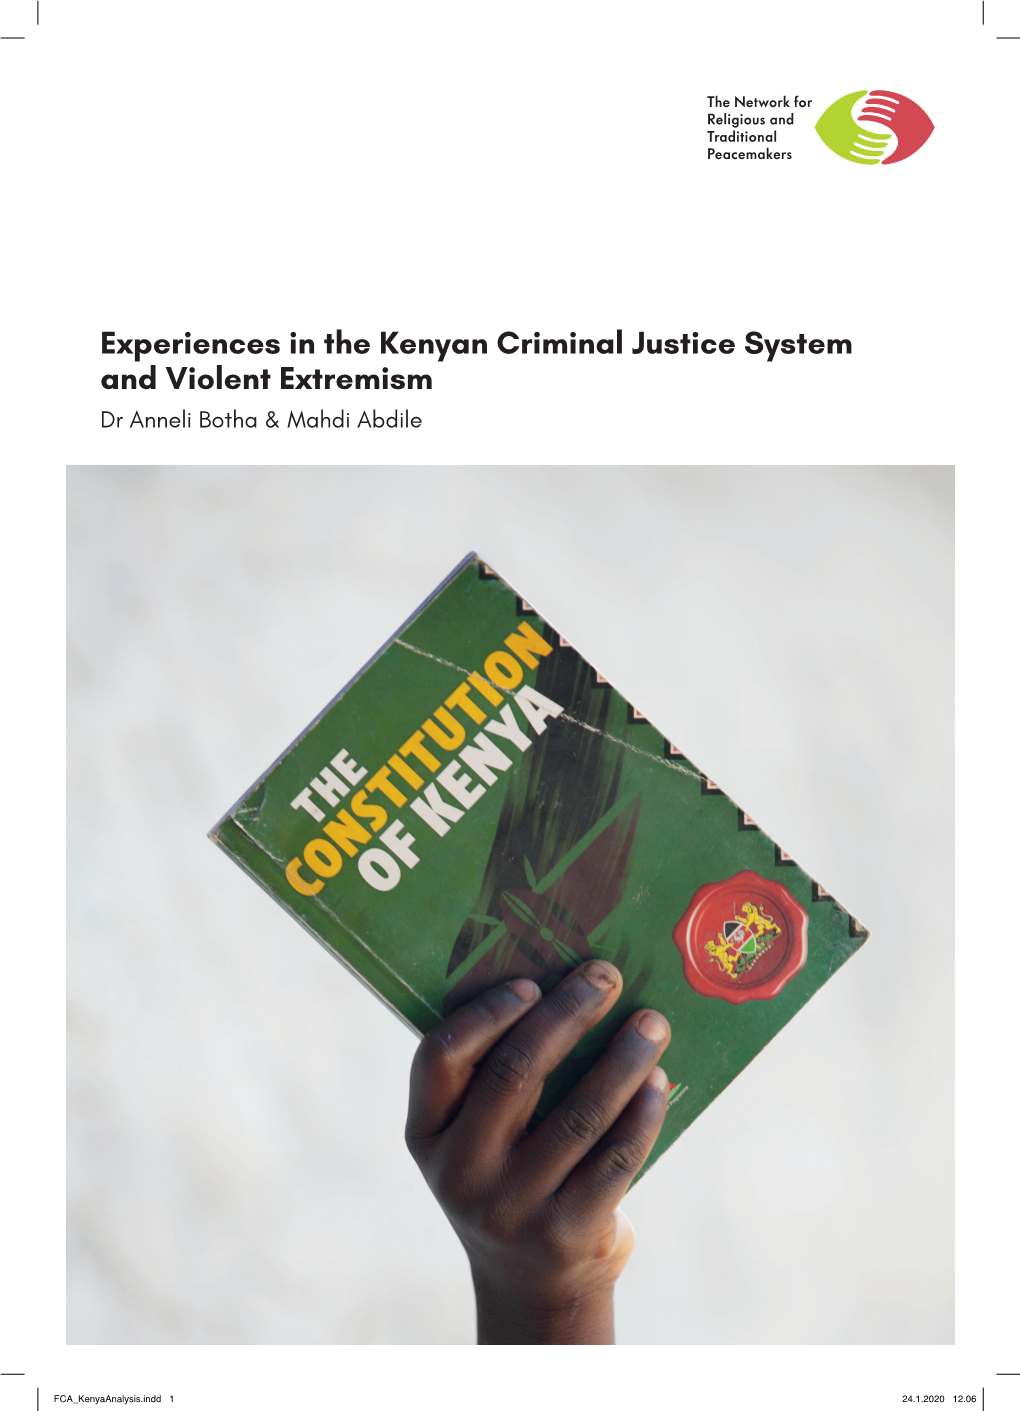 Experiences in the Kenyan Criminal Justice System and Violent Extremism Dr Anneli Botha & Mahdi Abdile